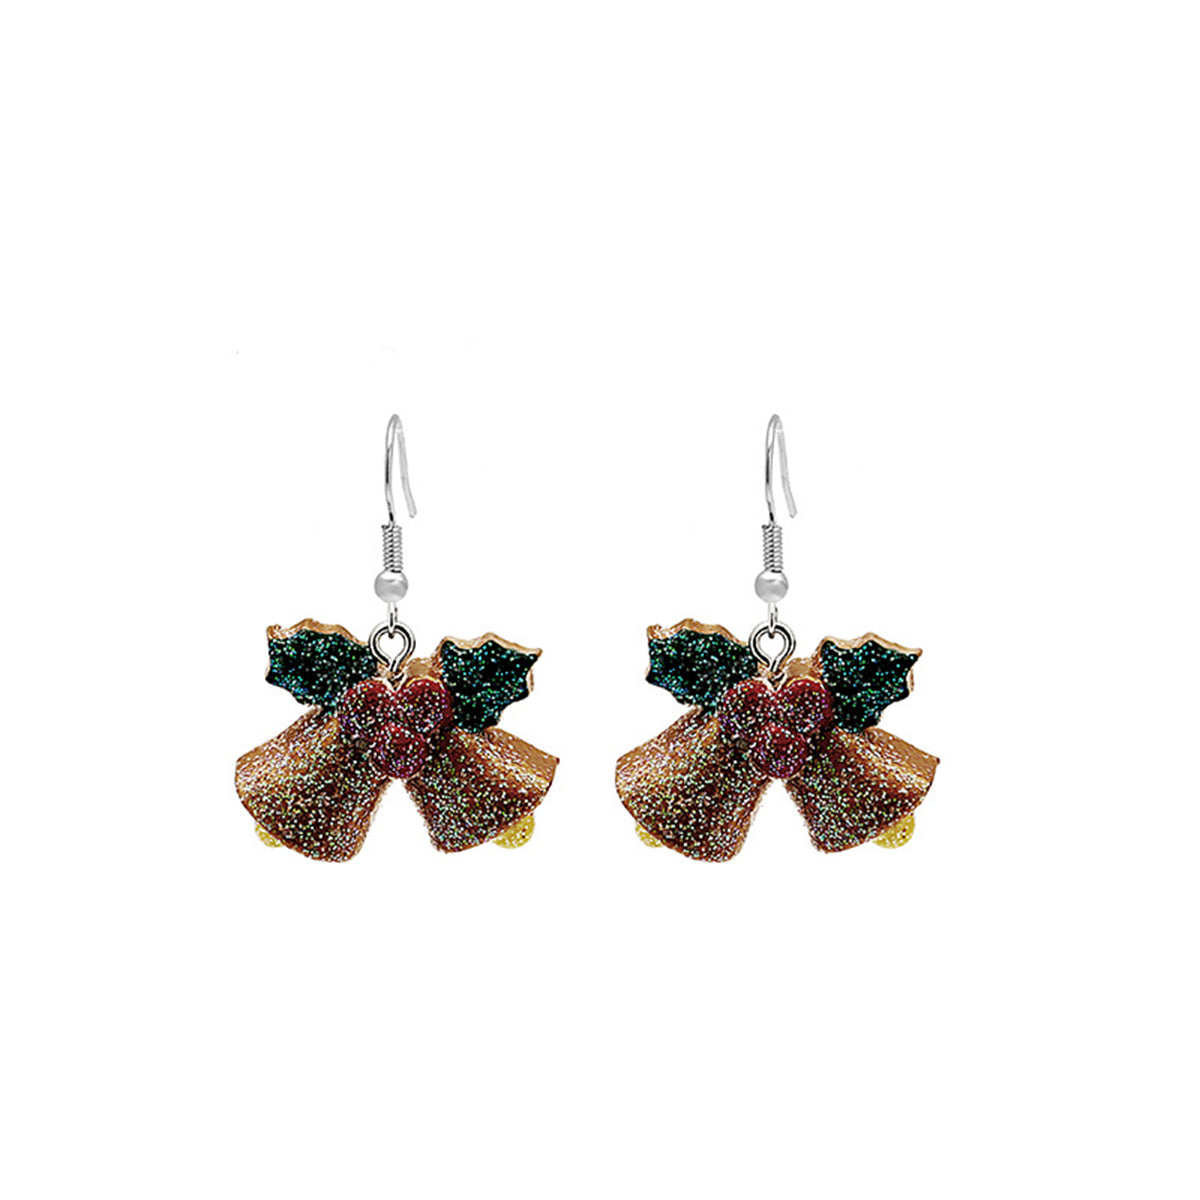 Green Resin & Silver-Plated Bow Drop Earrings